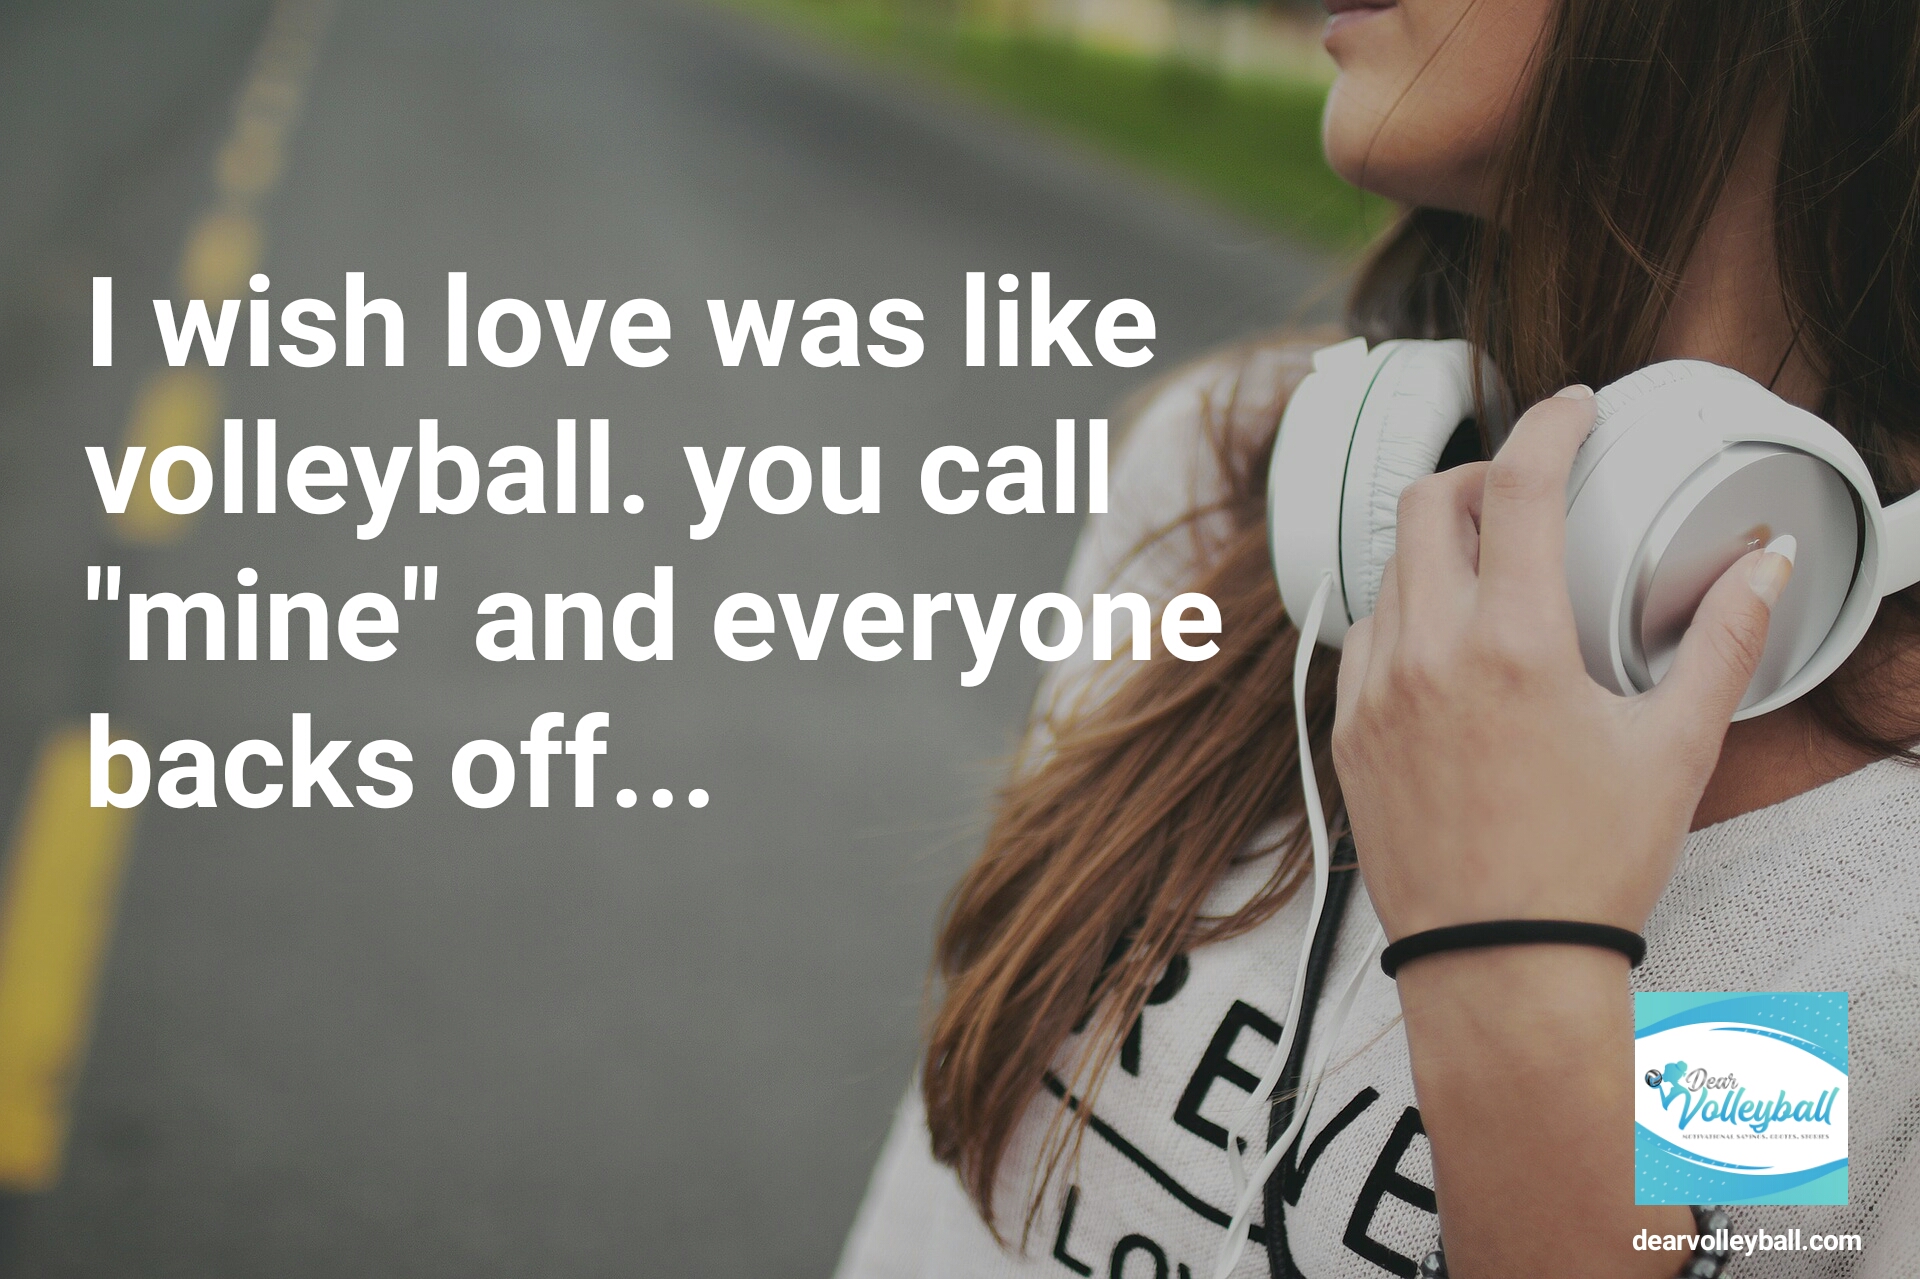 "I wish love was like volleyball. You call "mine" and everyone backs off..." and other strong girls pictures paired with an inspirational volleyball quote on Dear Volleyball.com.